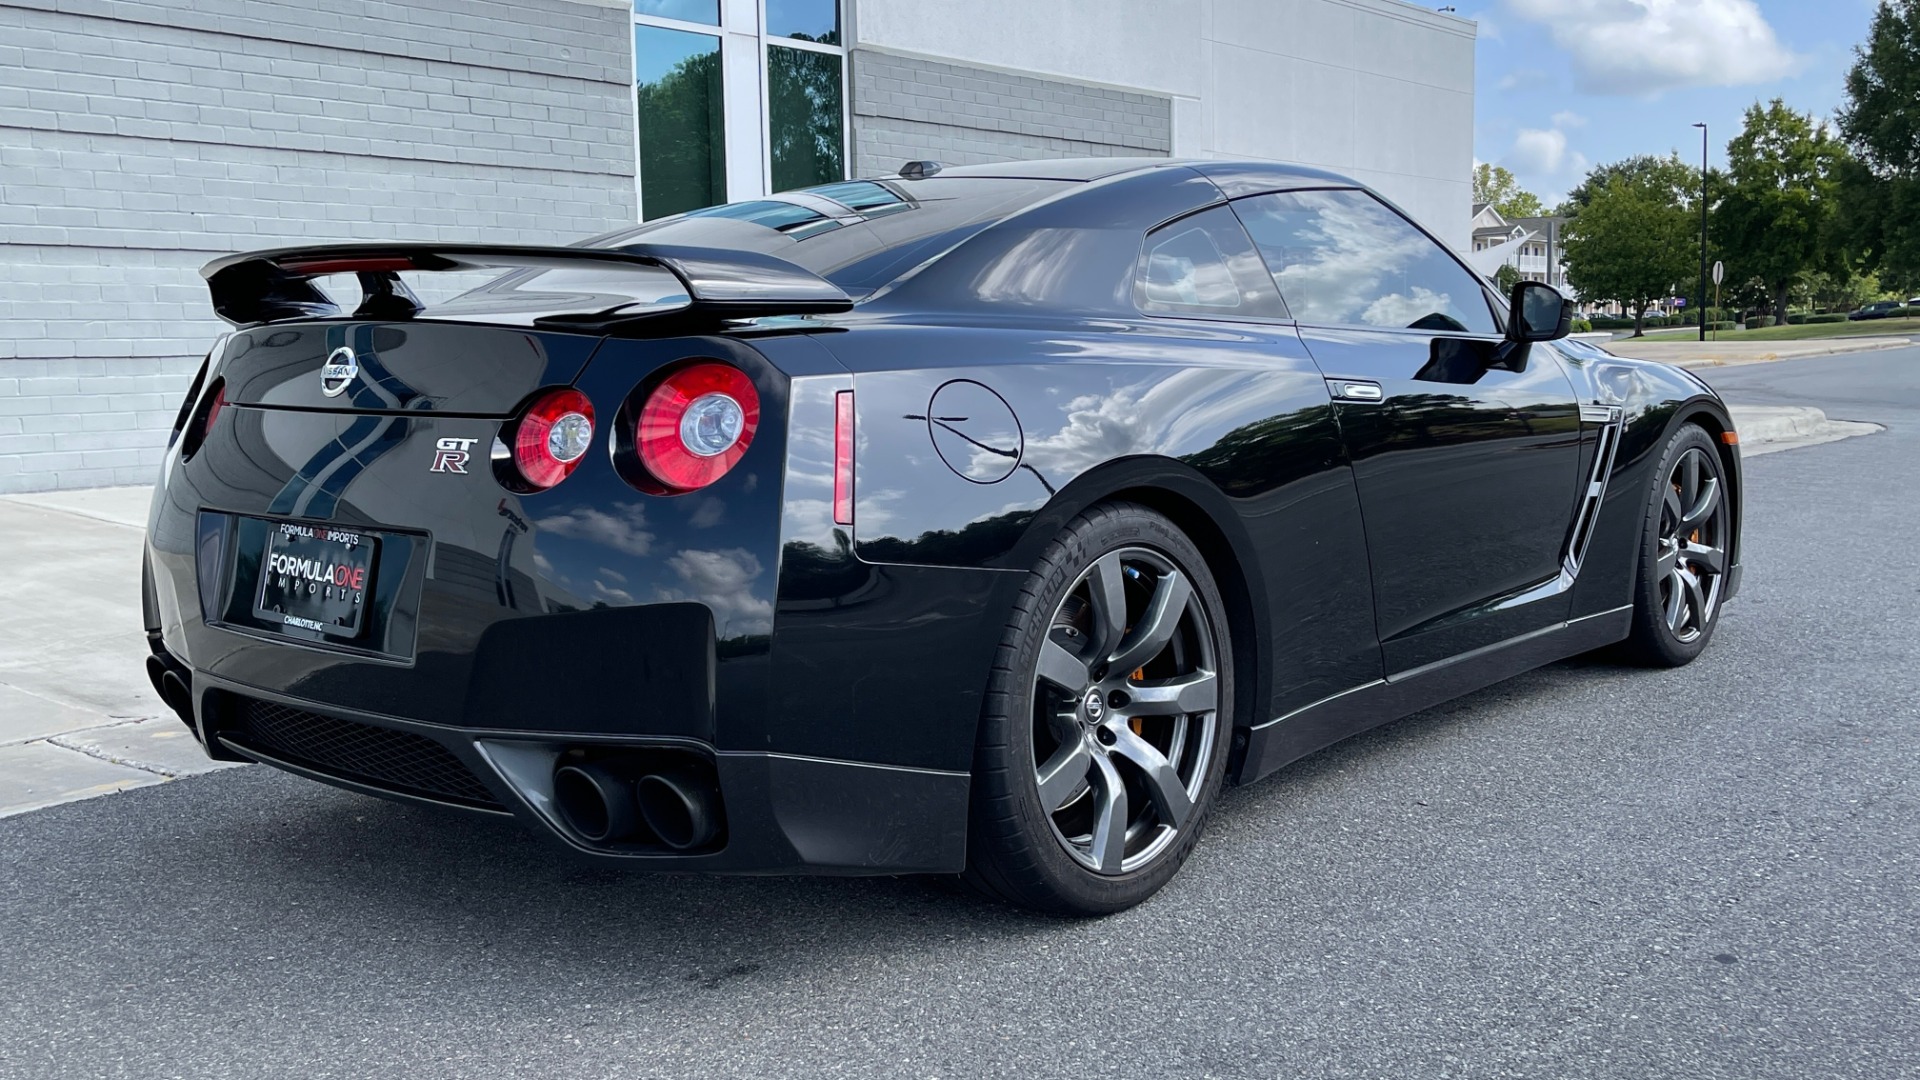 Used 2009 Nissan GT-R PREMIUM COUPE / AWD / TT 3.8L V6 / NAV / BOSE / BREMBO for sale Sold at Formula Imports in Charlotte NC 28227 6